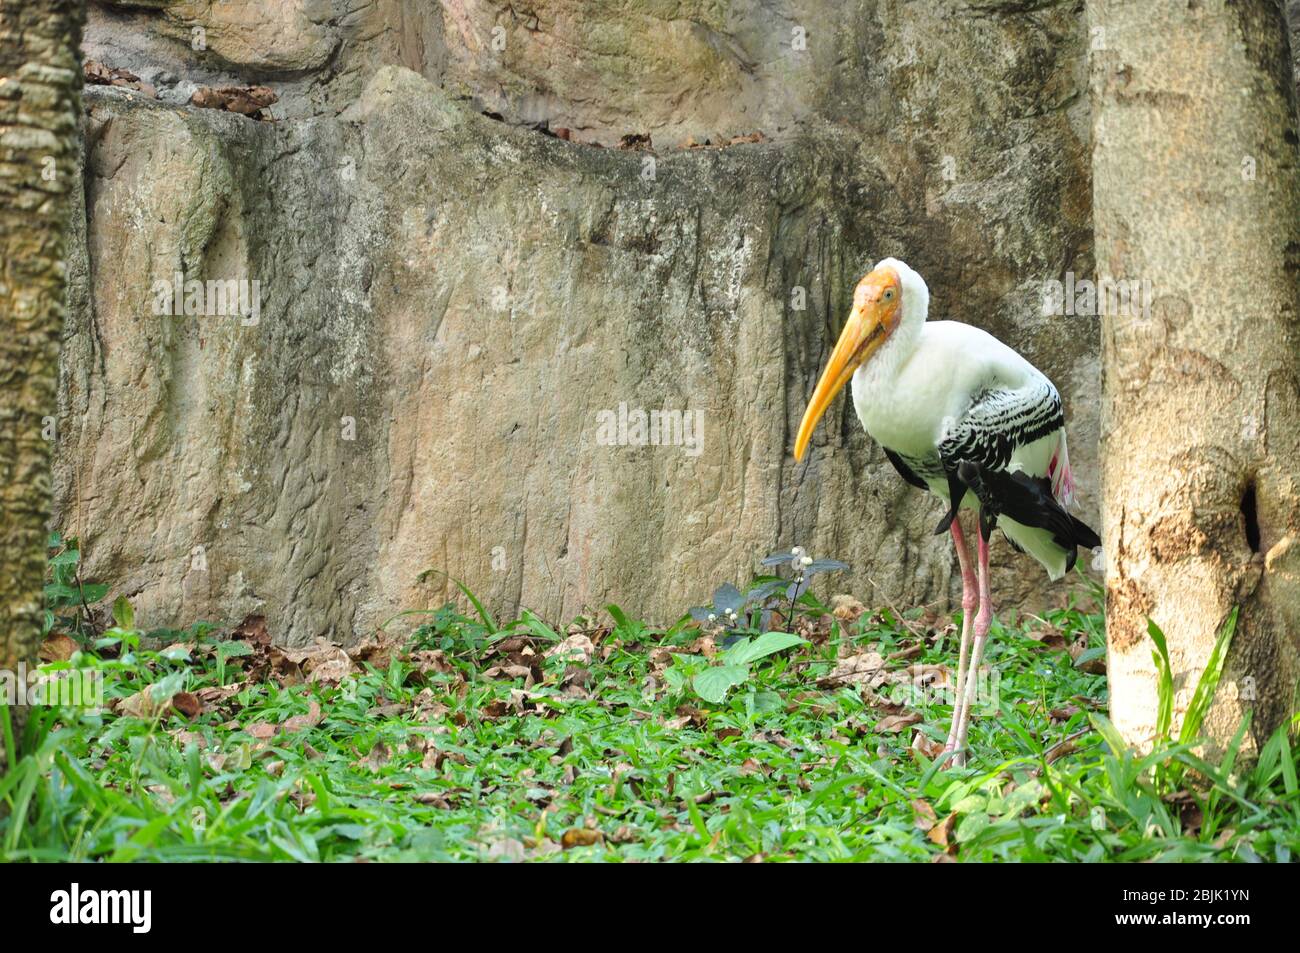 Painted Storks feed in groups in shallow wetlands. Stock Photo